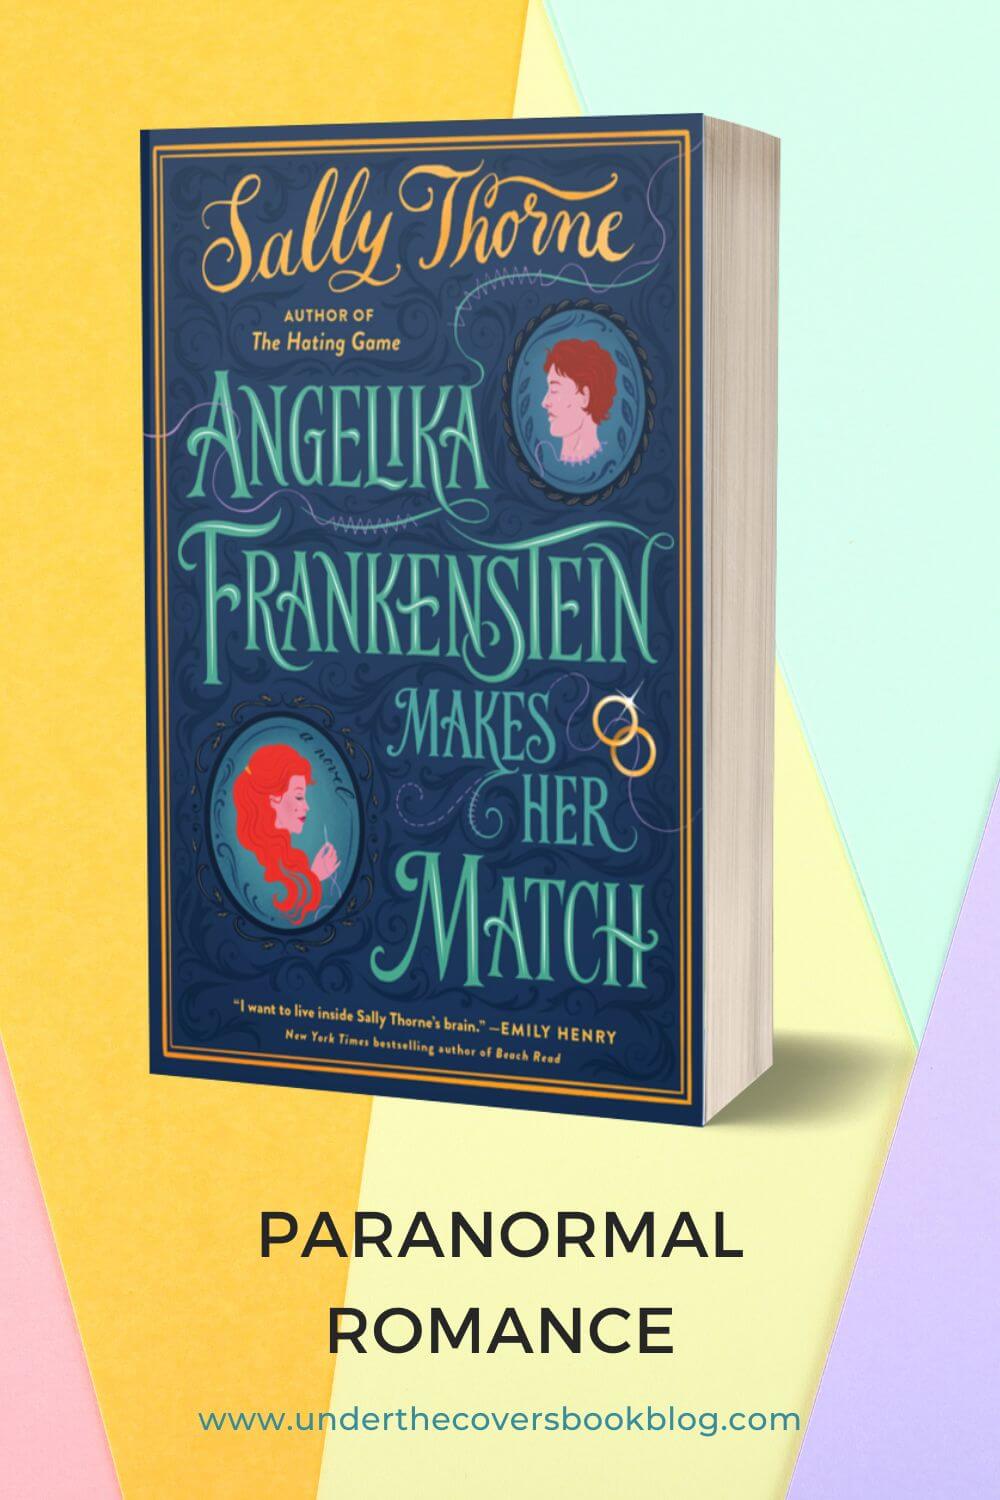 Angelika Frankenstein Makes Her Match by Sally Thorne Book Review